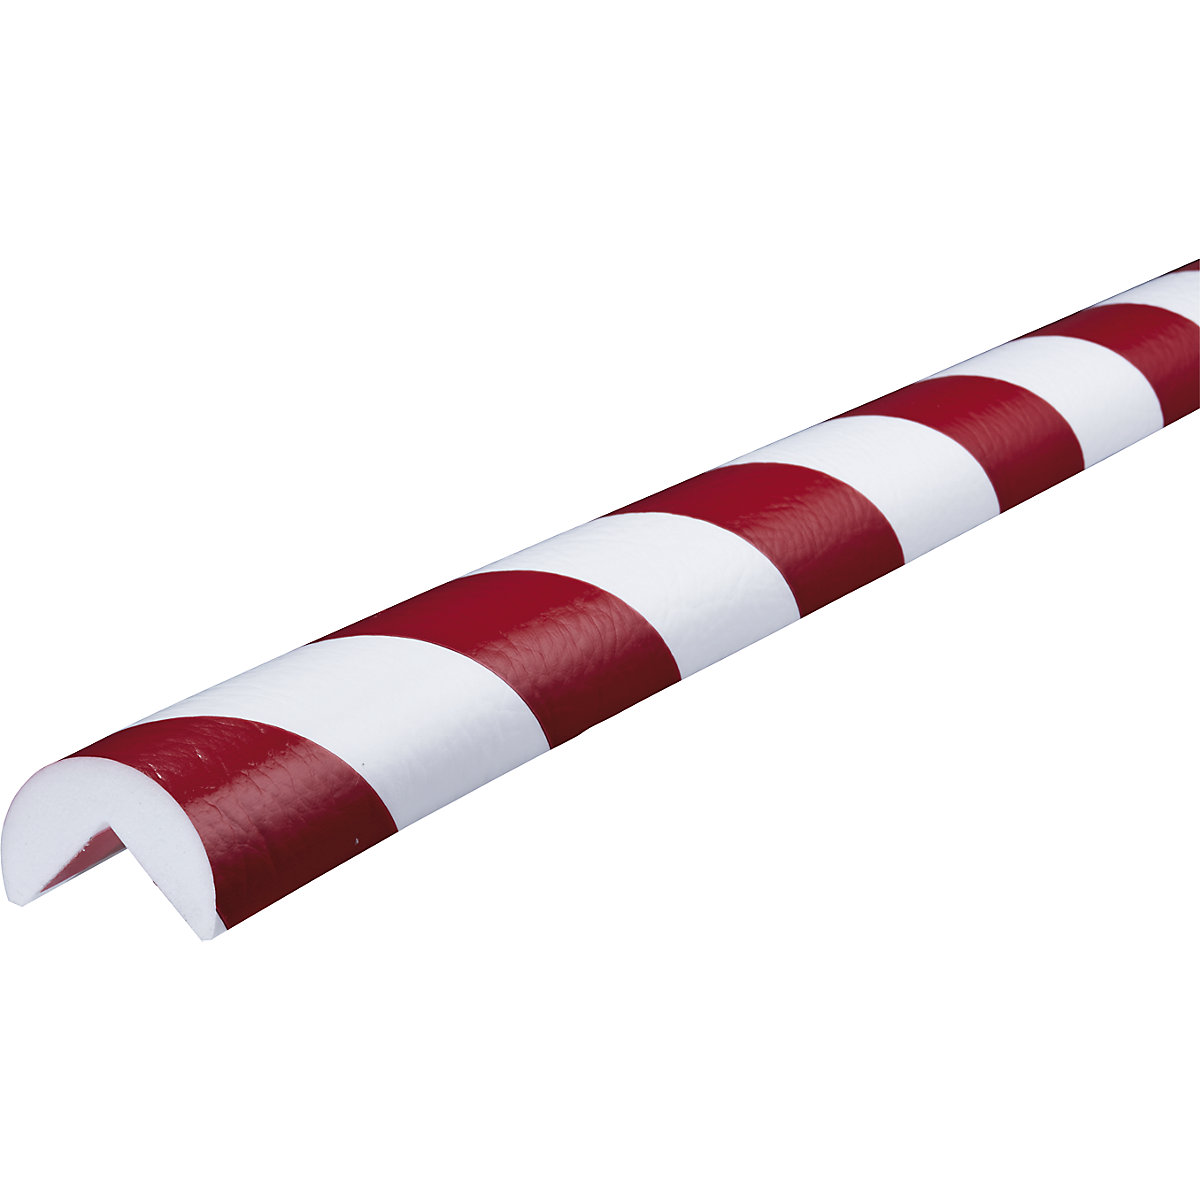 Knuffi® corner protection – SHG, type A, 1 x 50 m roll, red / white-11